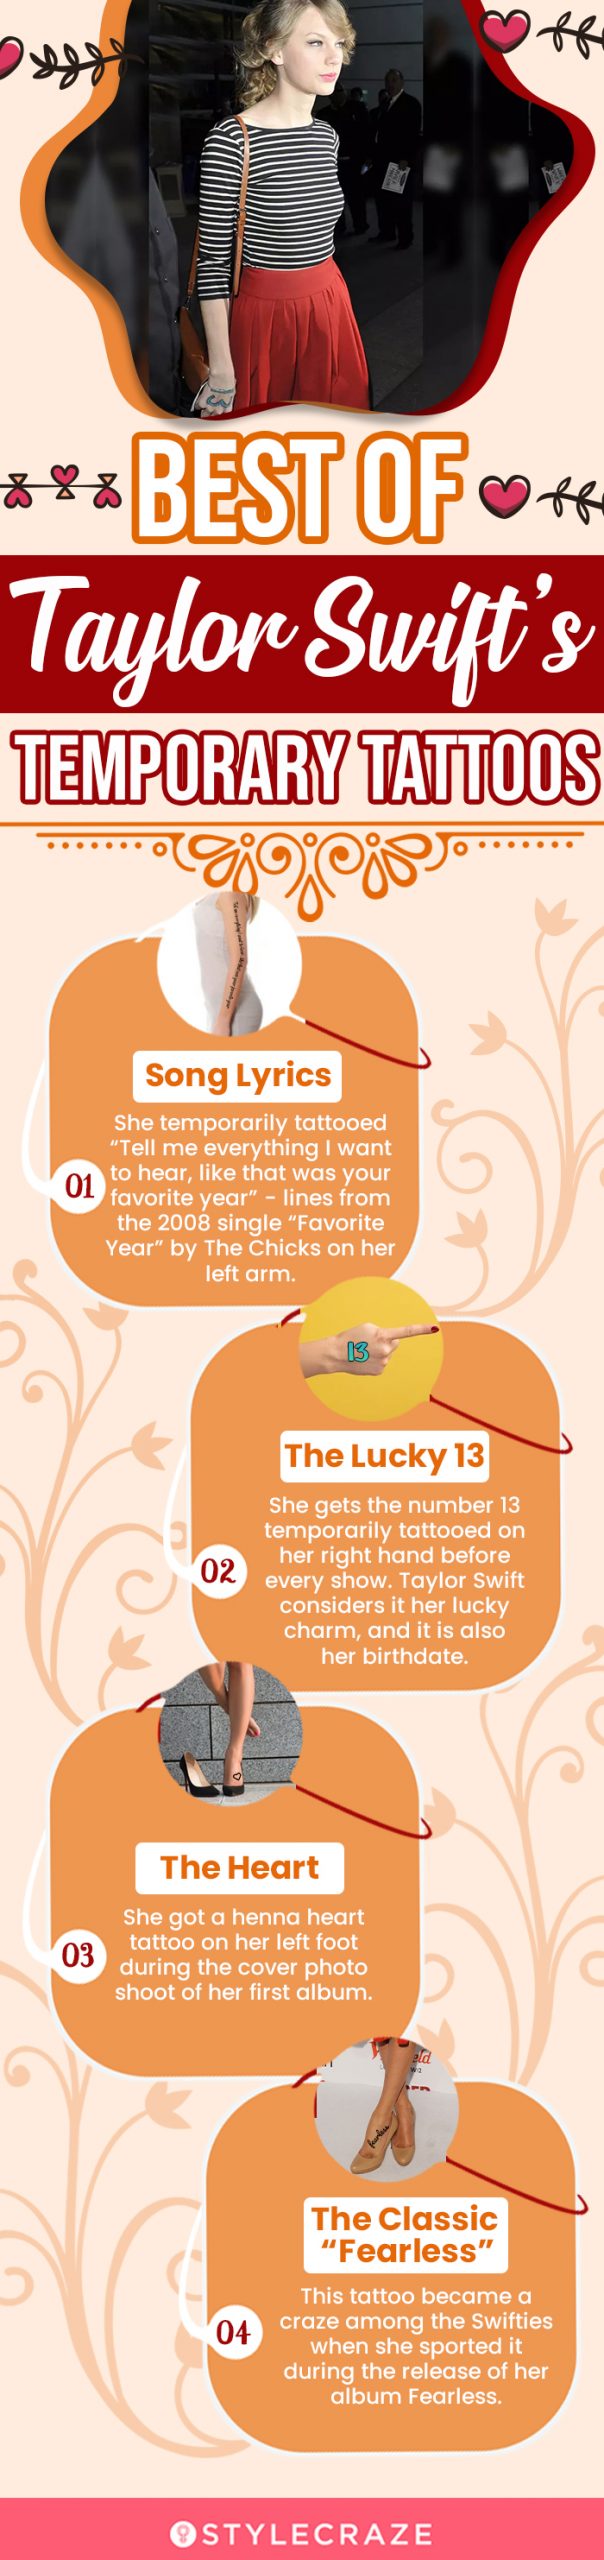 best of taylor swift’s temporary tattoos (infographic)